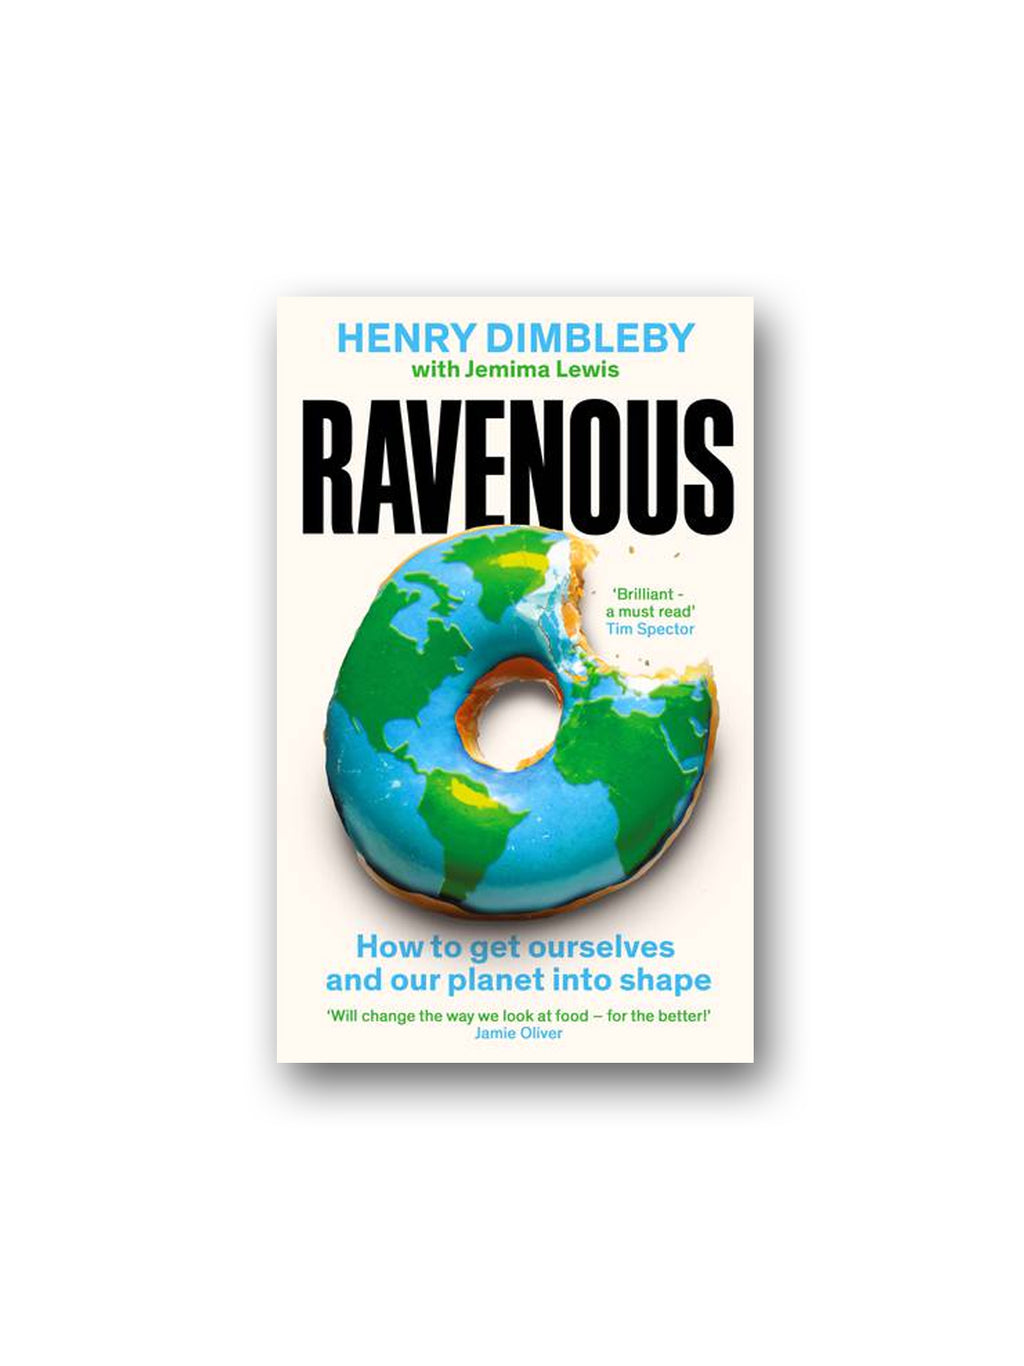 Ravenous : How to get ourselves and our planet into shape